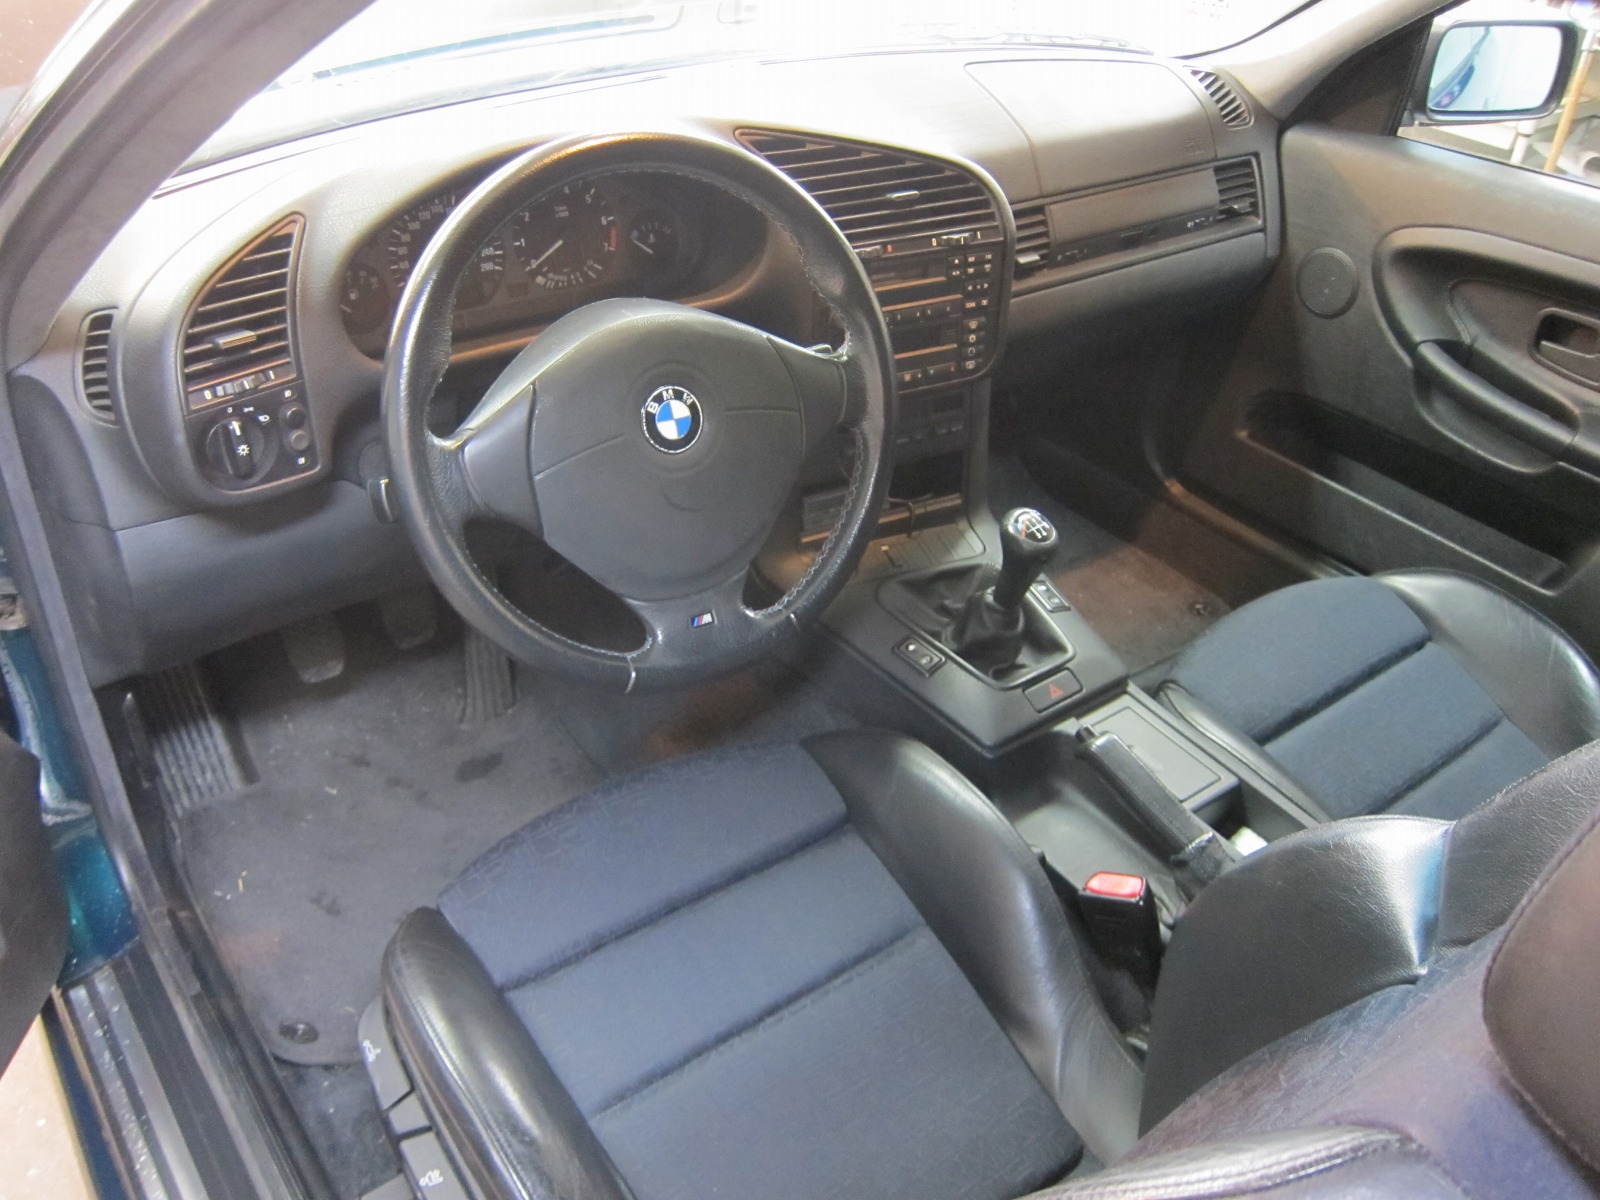 20130808-bmw-318is-02